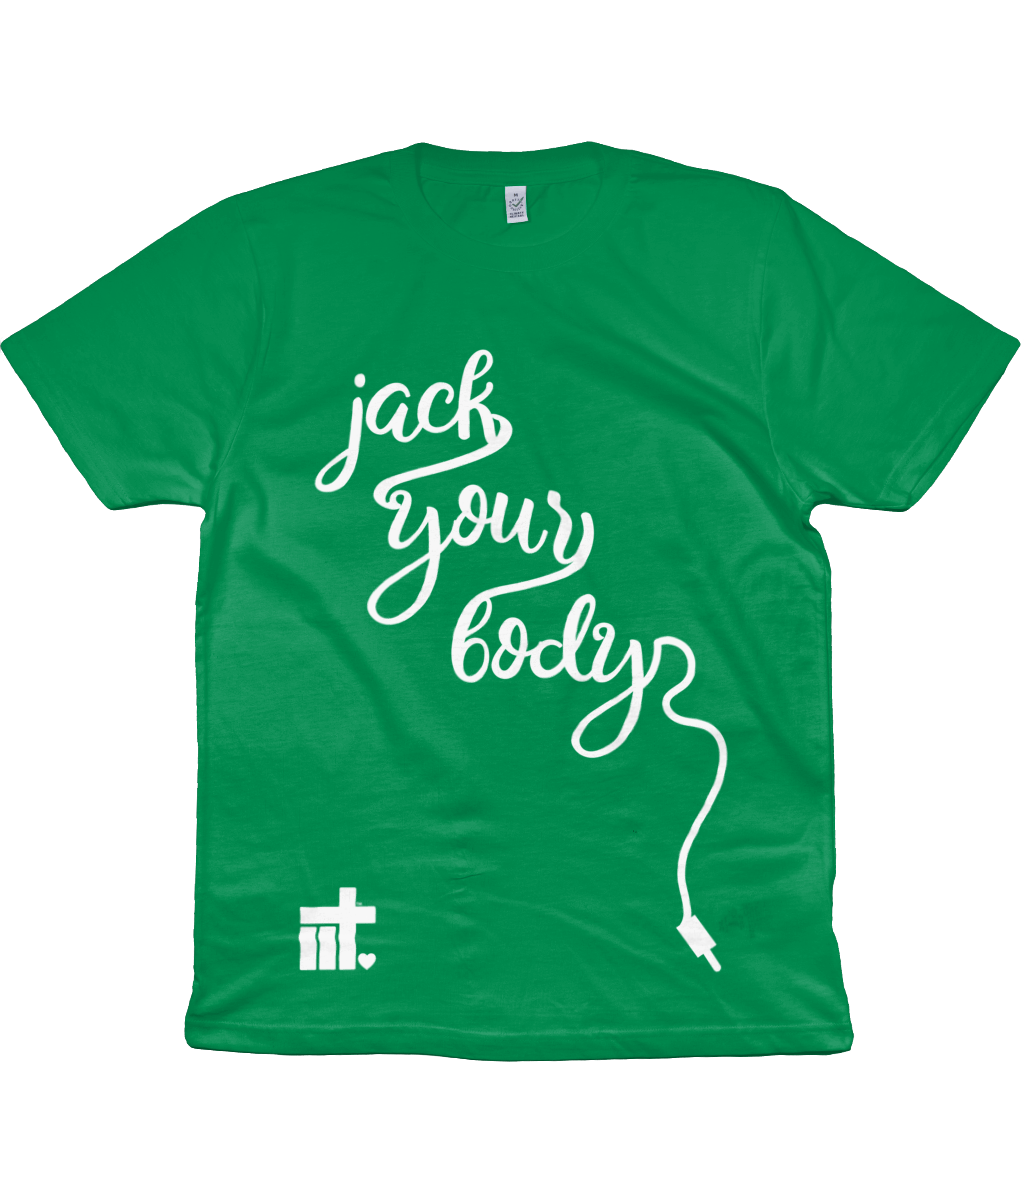 T-Shirt Jack Cable